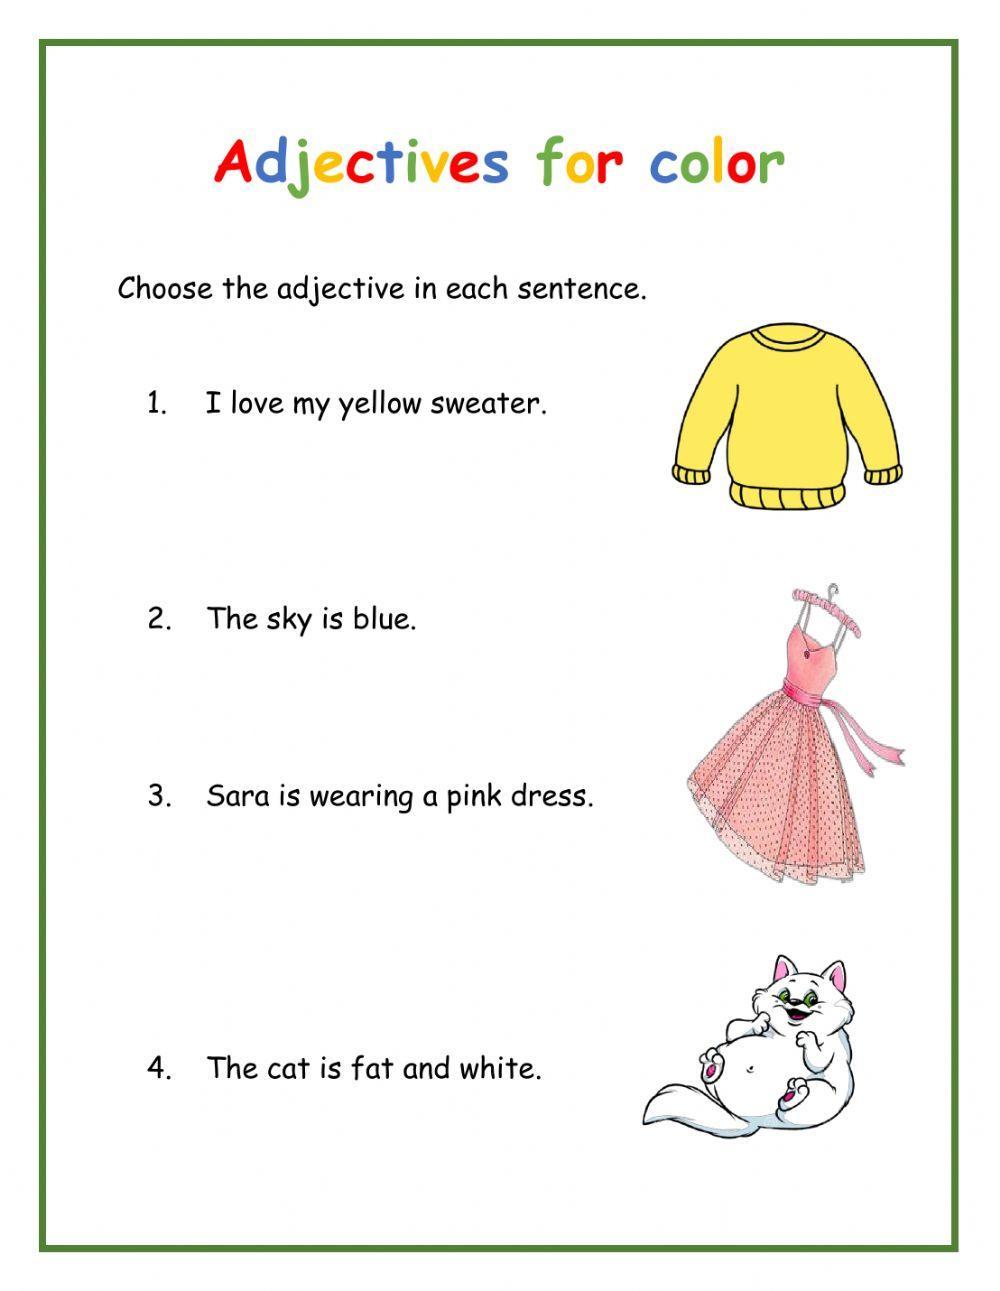 Adjectives for color